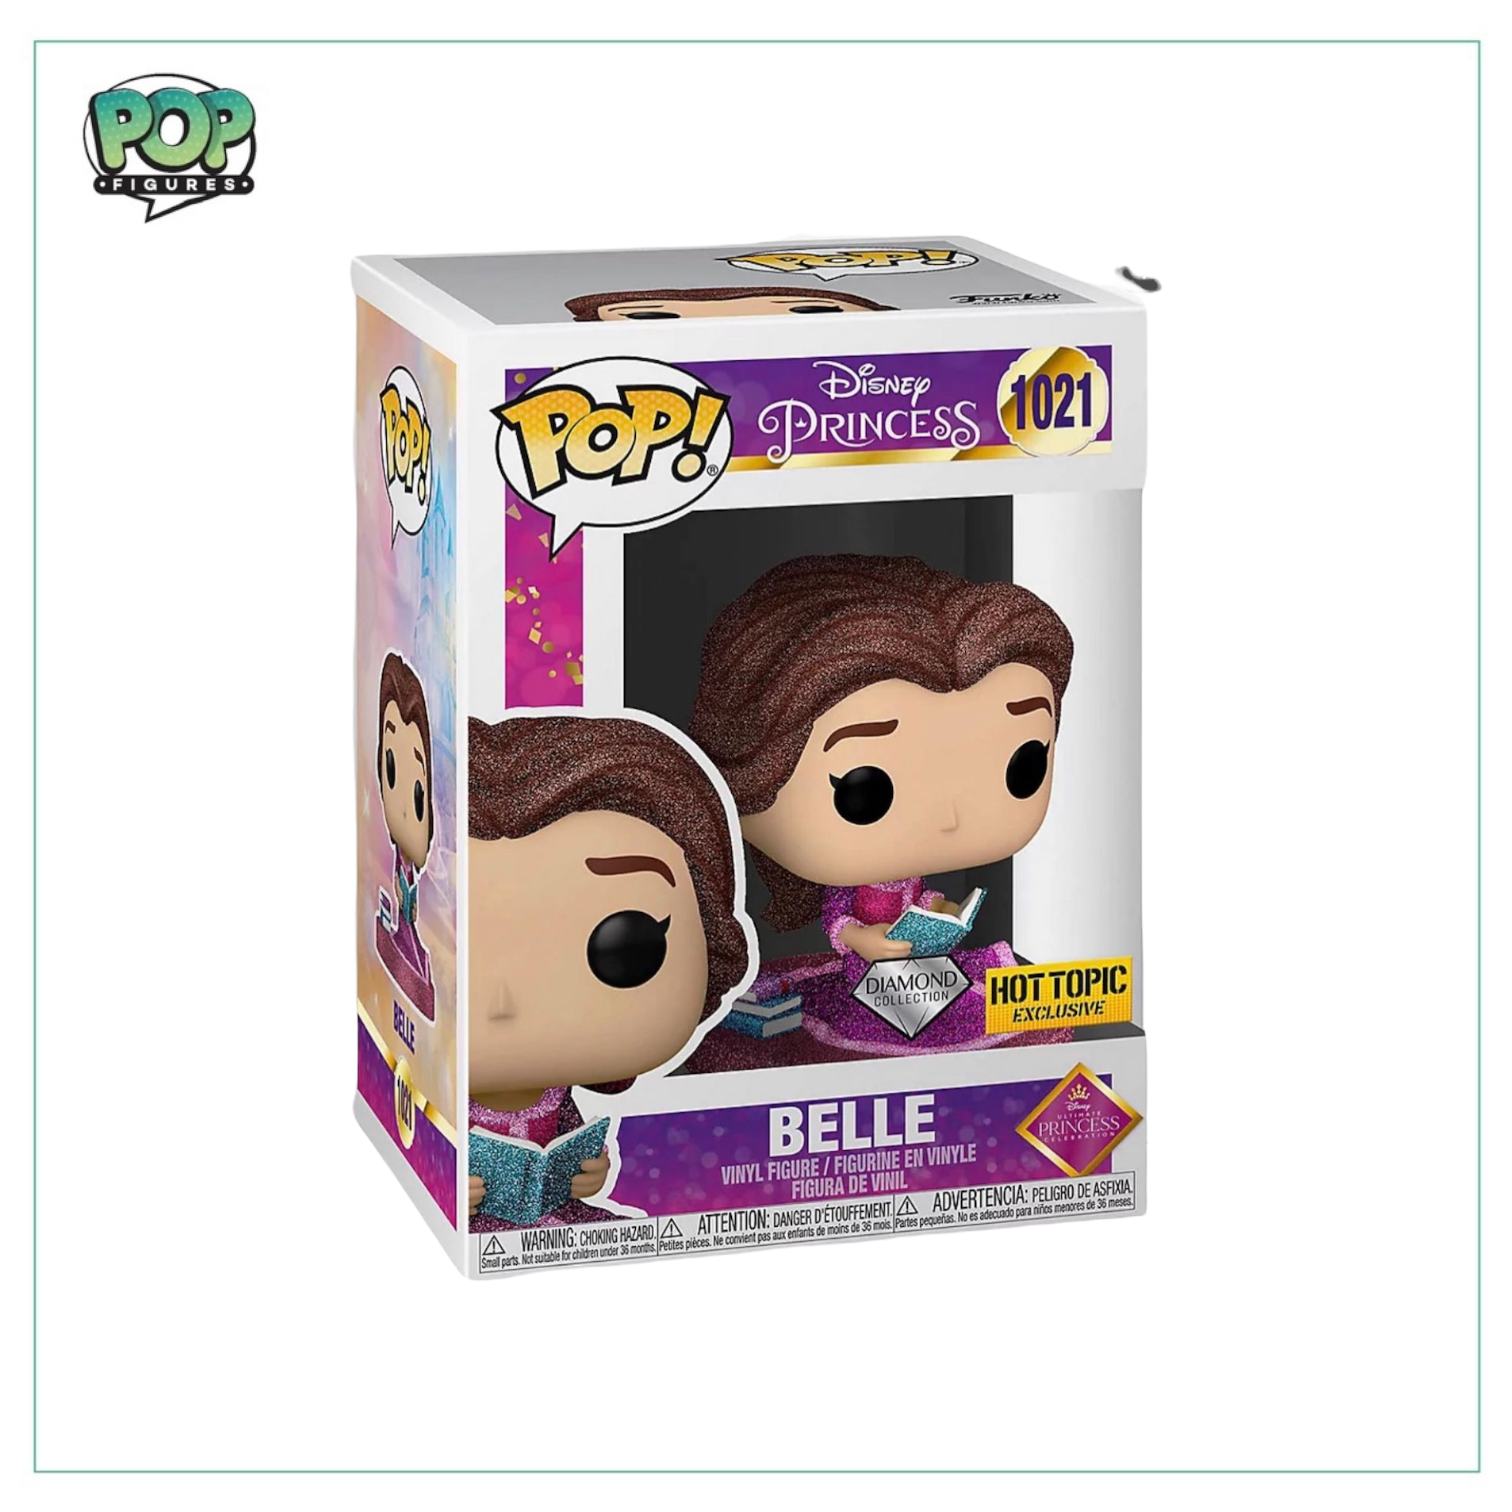 Belle (Diamond Collection) #1021 Funko Pop! Princess - Hot Topic Exclusive - Angry Cat